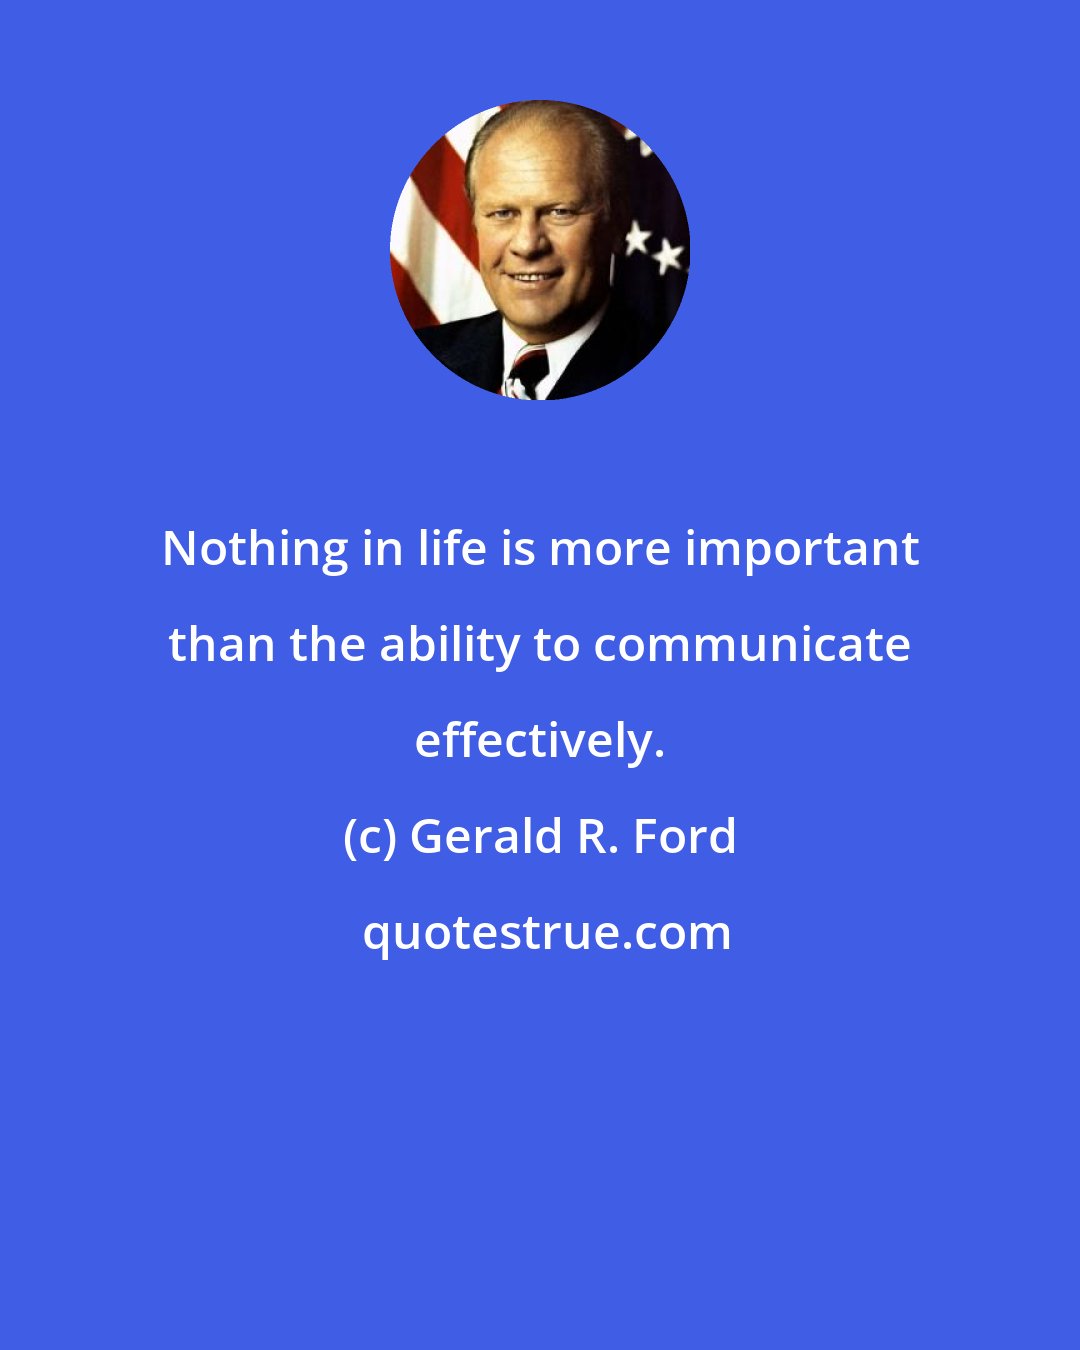 Gerald R. Ford: Nothing in life is more important than the ability to communicate effectively.